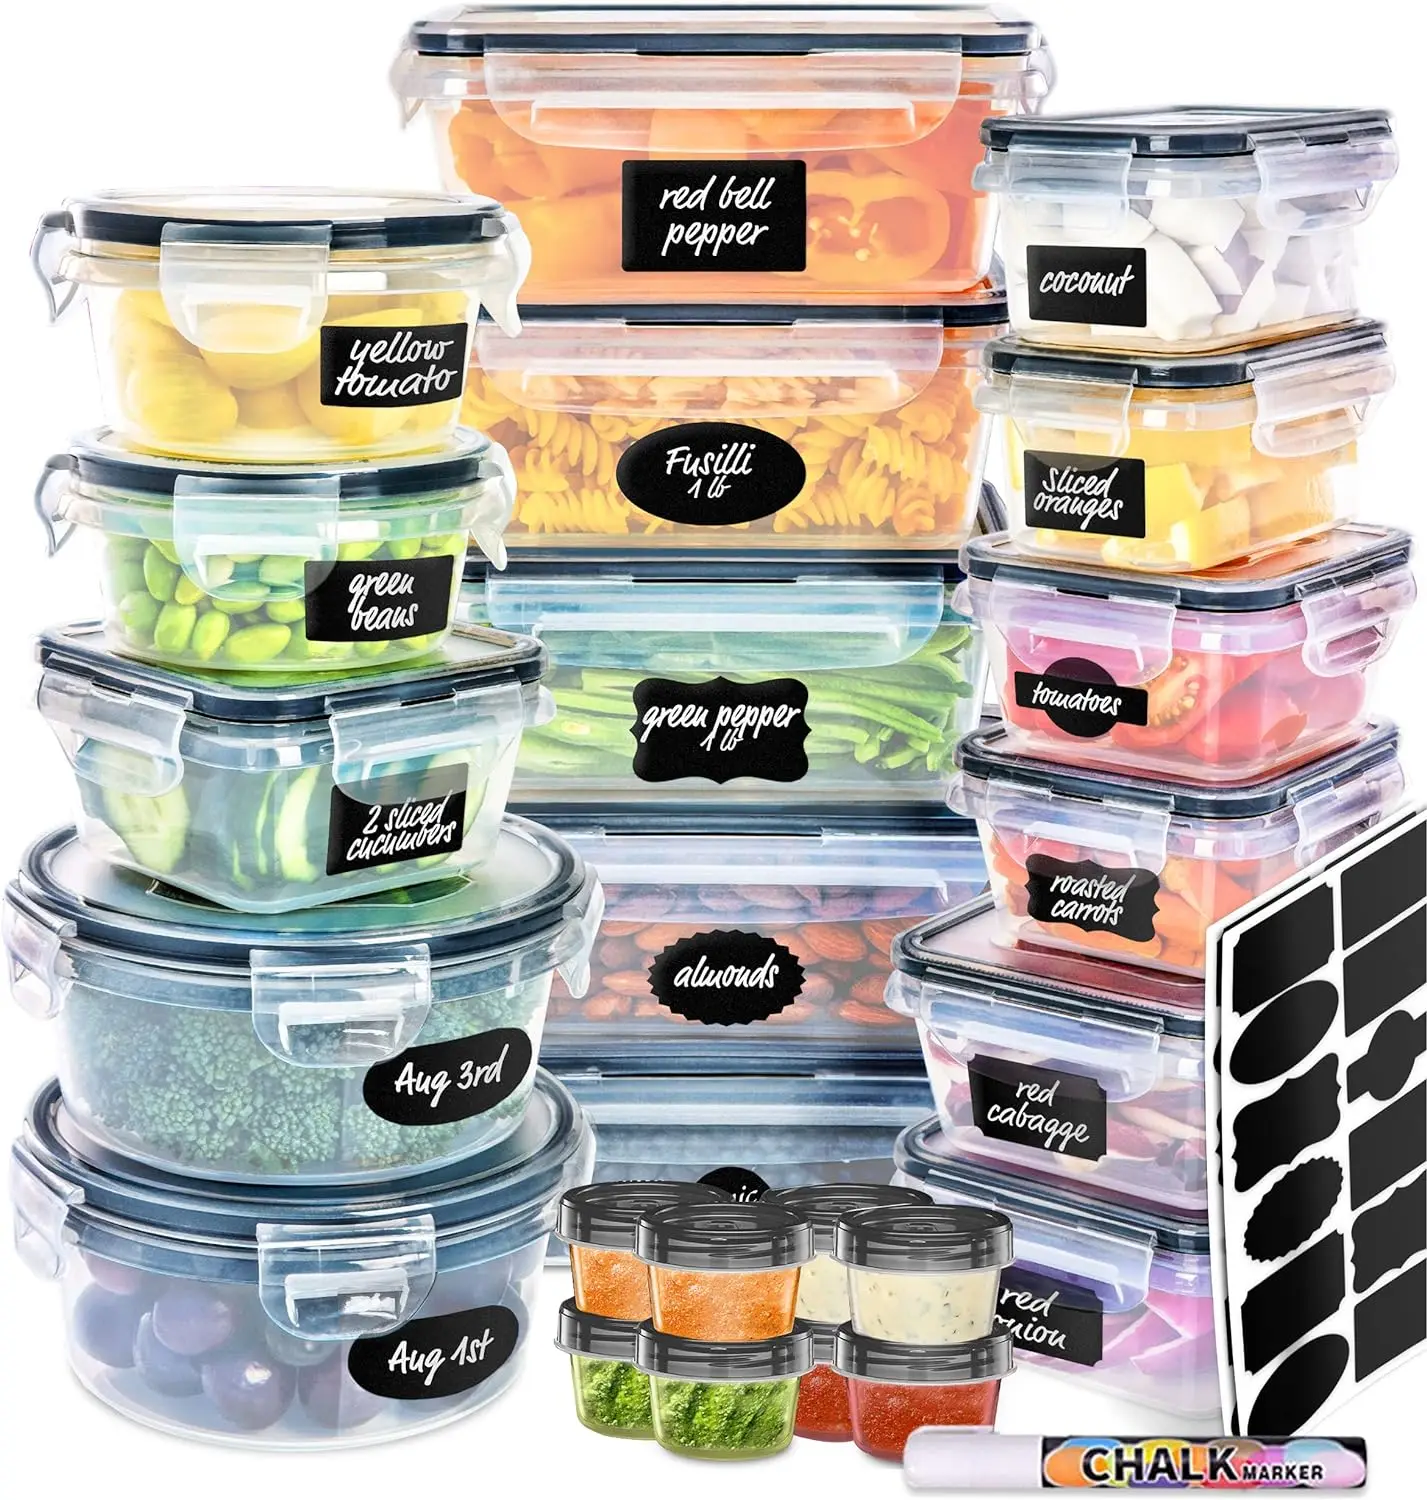 

50-piece Food storage Containers Set with Lids, Plastic Leak-Proof BPA-Free Containers for Kitchen Organization